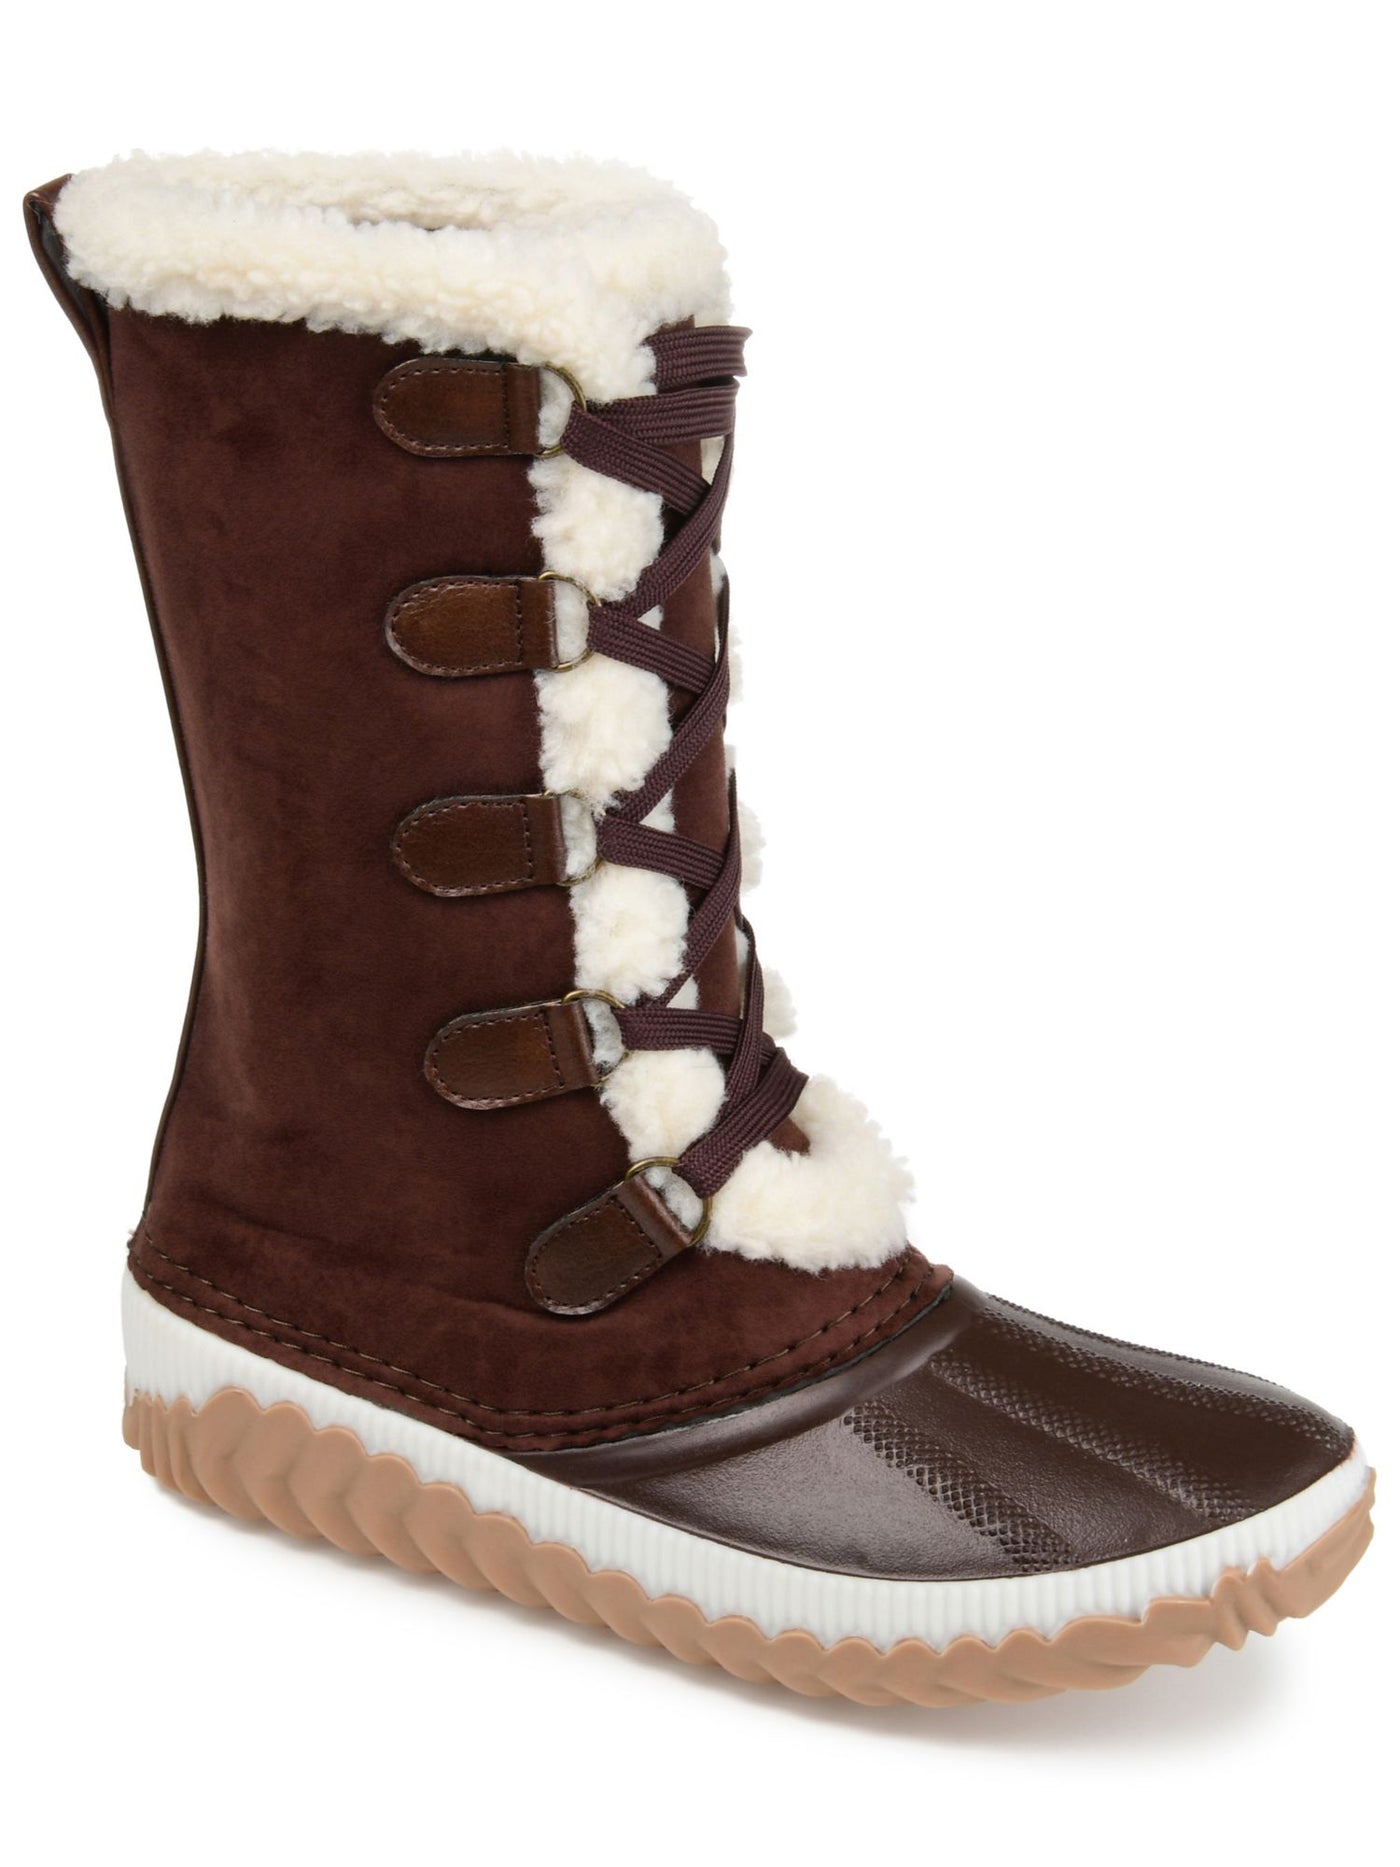 JOURNEE COLLECTION Womens Brown Insulated Waterproof Blizzard Round Toe Lace-Up Snow Boots 6